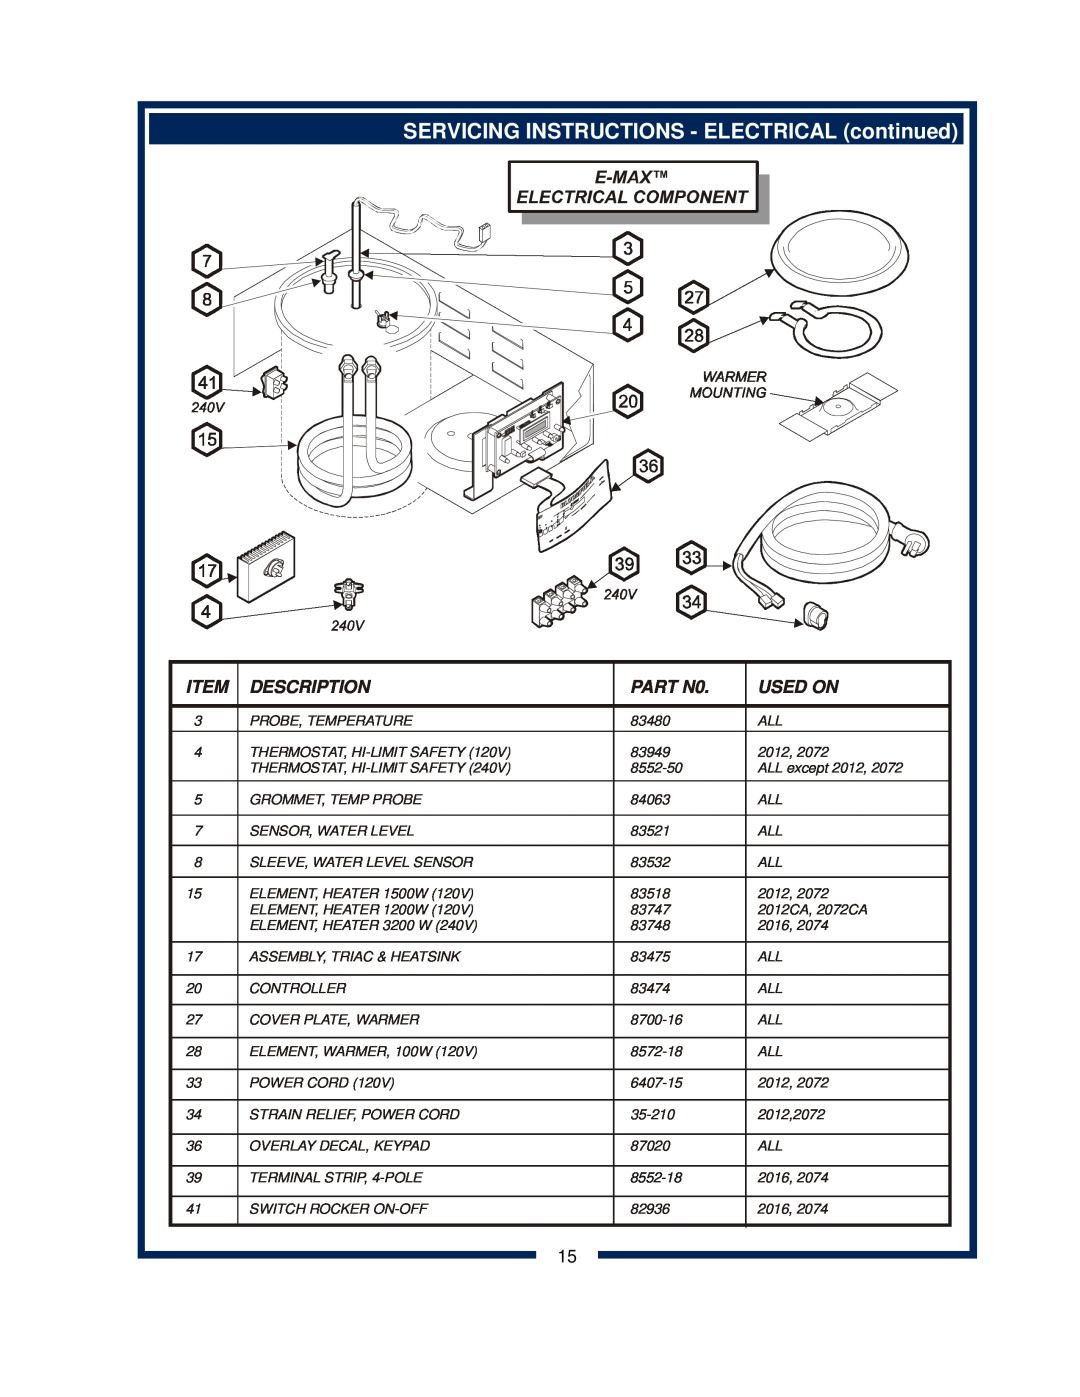 Bloomfield 2074FRL, 2074L, 2072FRL SERVICING INSTRUCTIONS - ELECTRICAL continued, Description, PART N0, Used On, 8552-18 